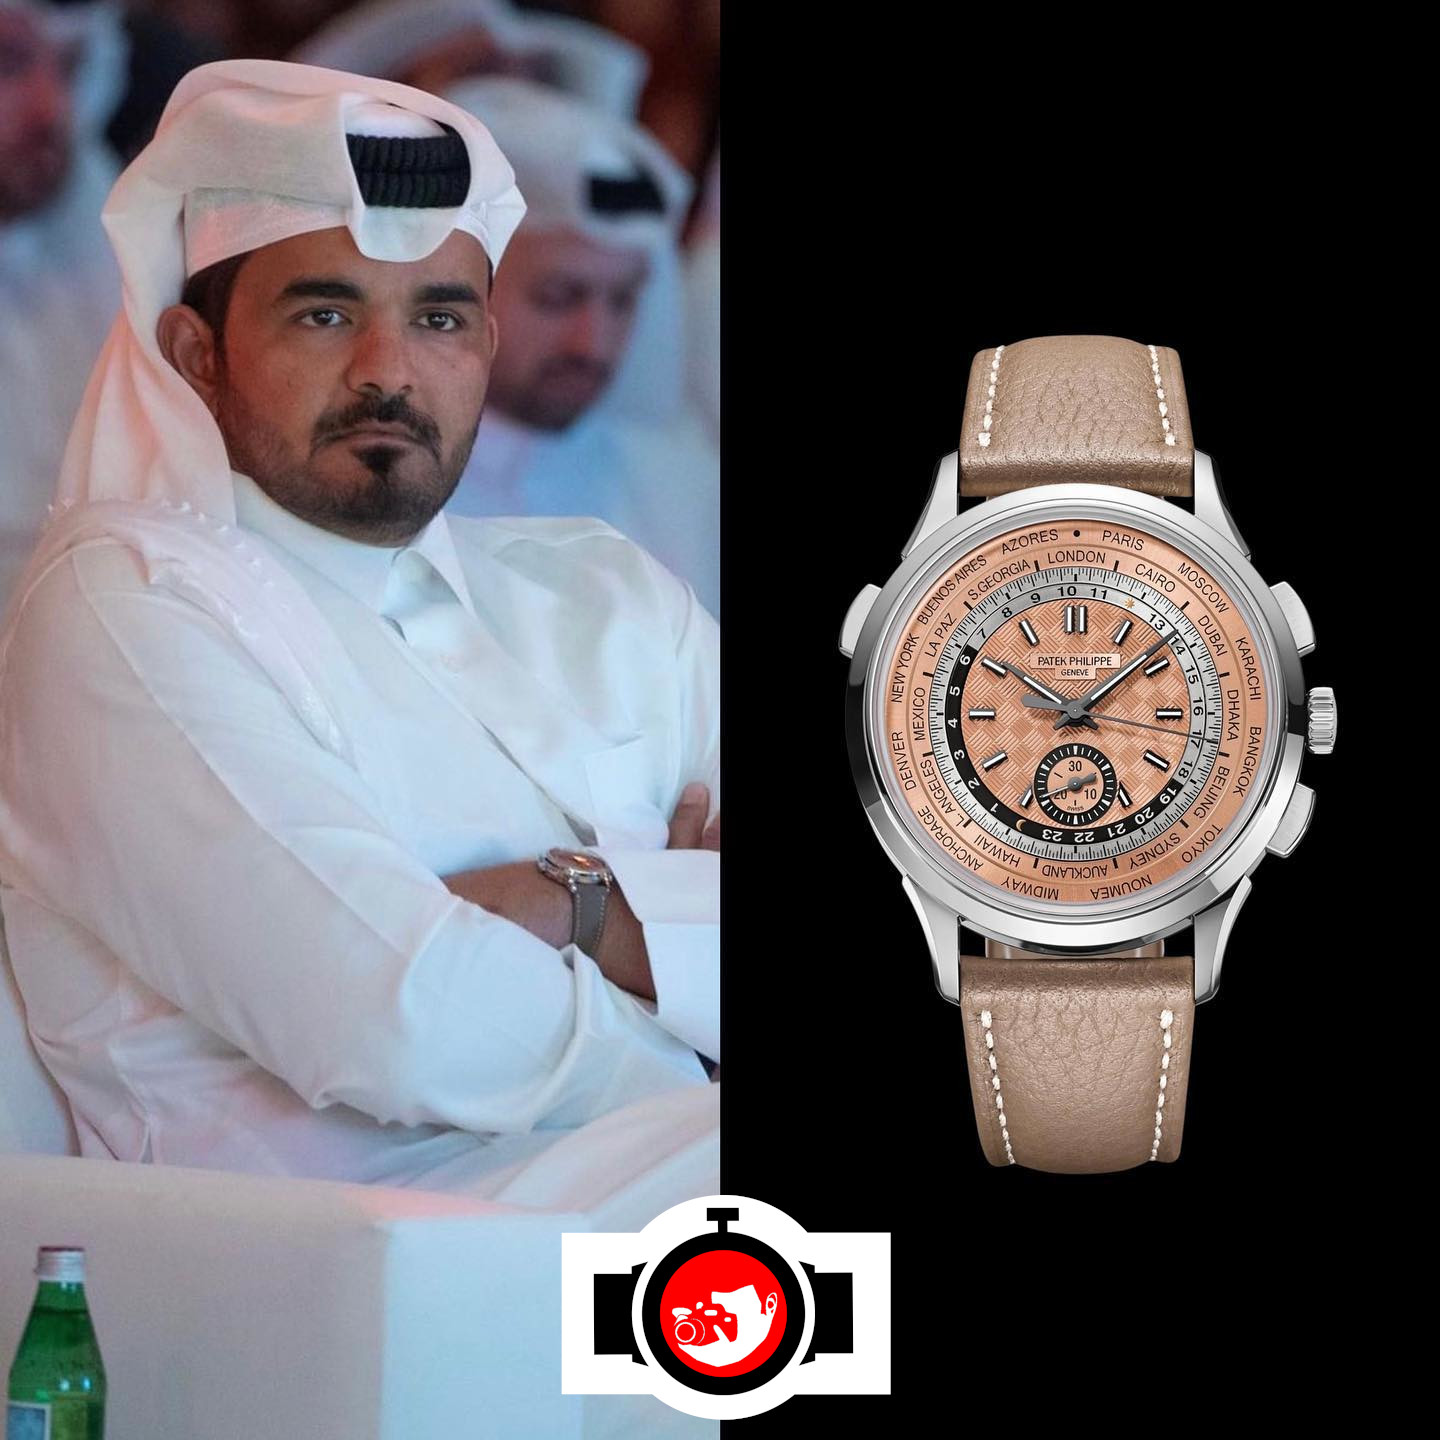 Exploring the Impressive Patek Philippe 5935A in Joaan Bin Hamad Al Thani's Watch Collection